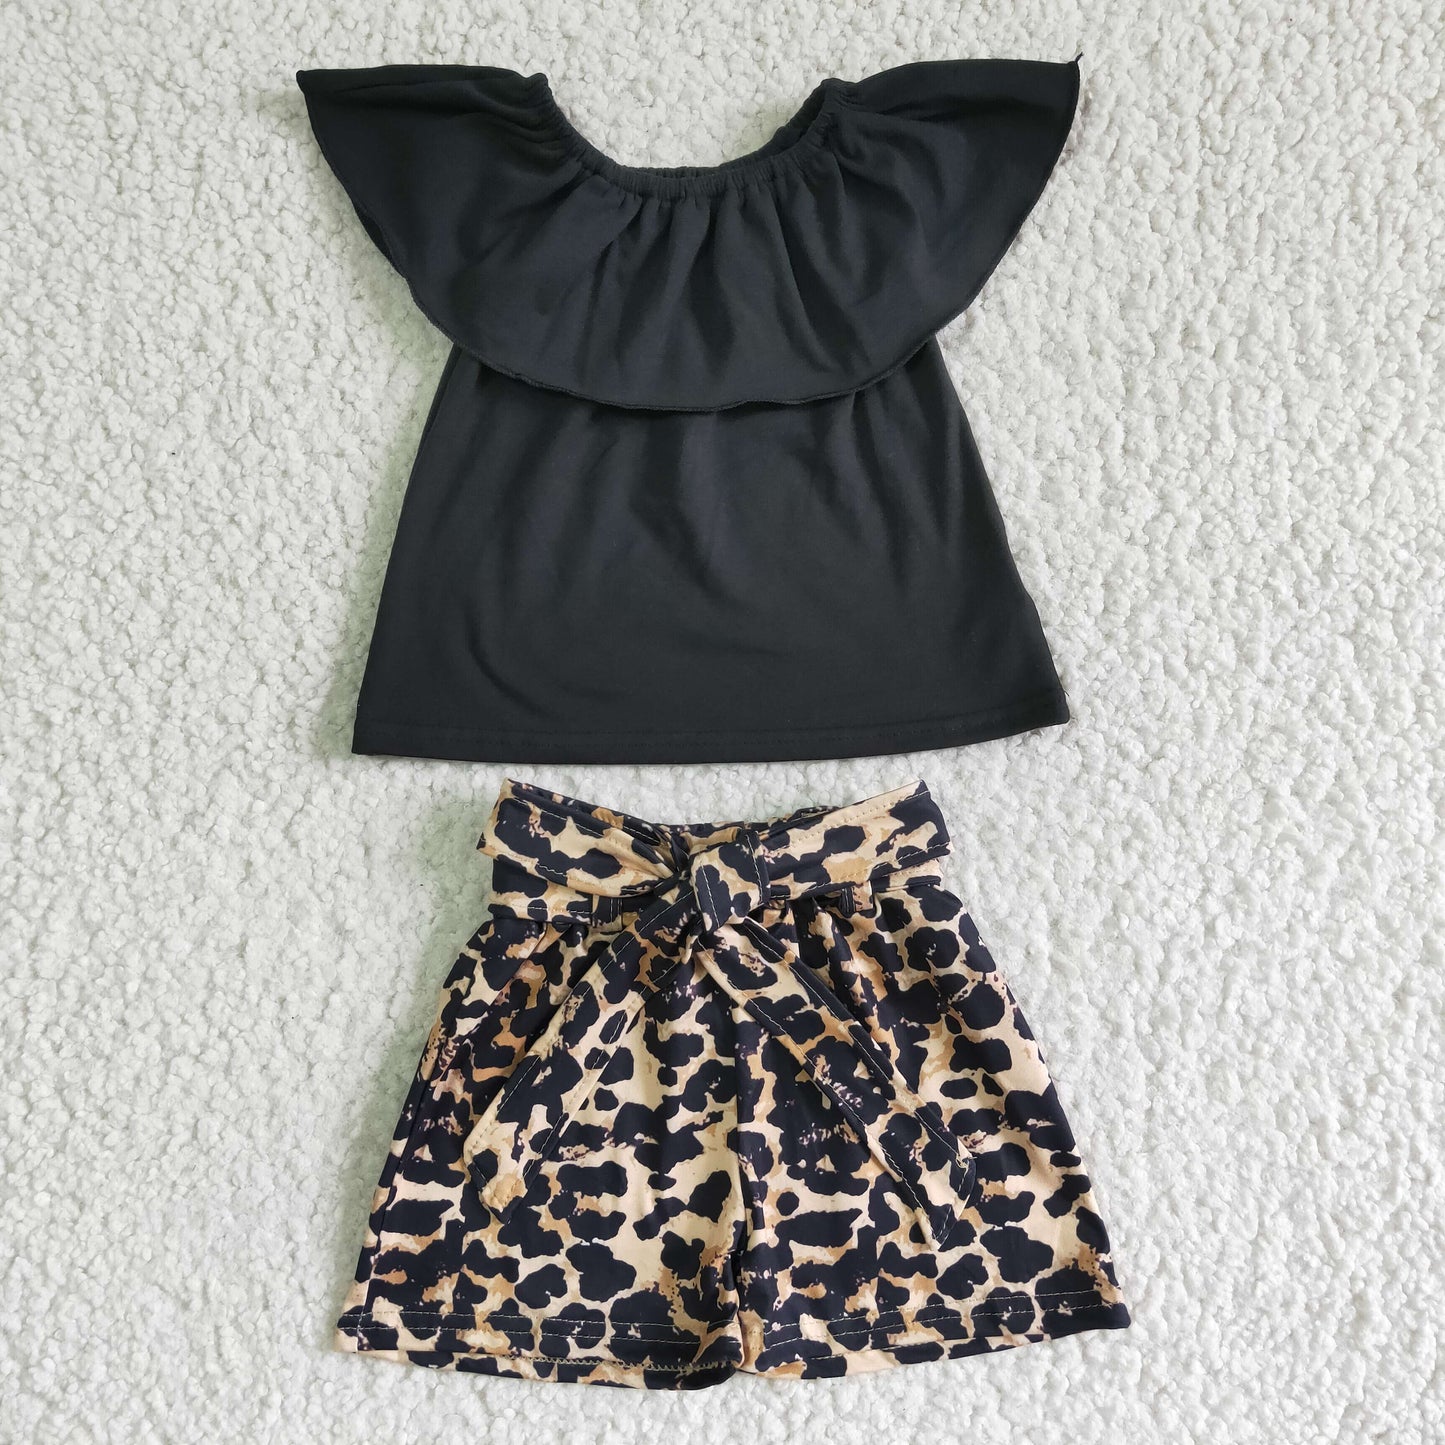 Black top leopard shorts girls summer outfits